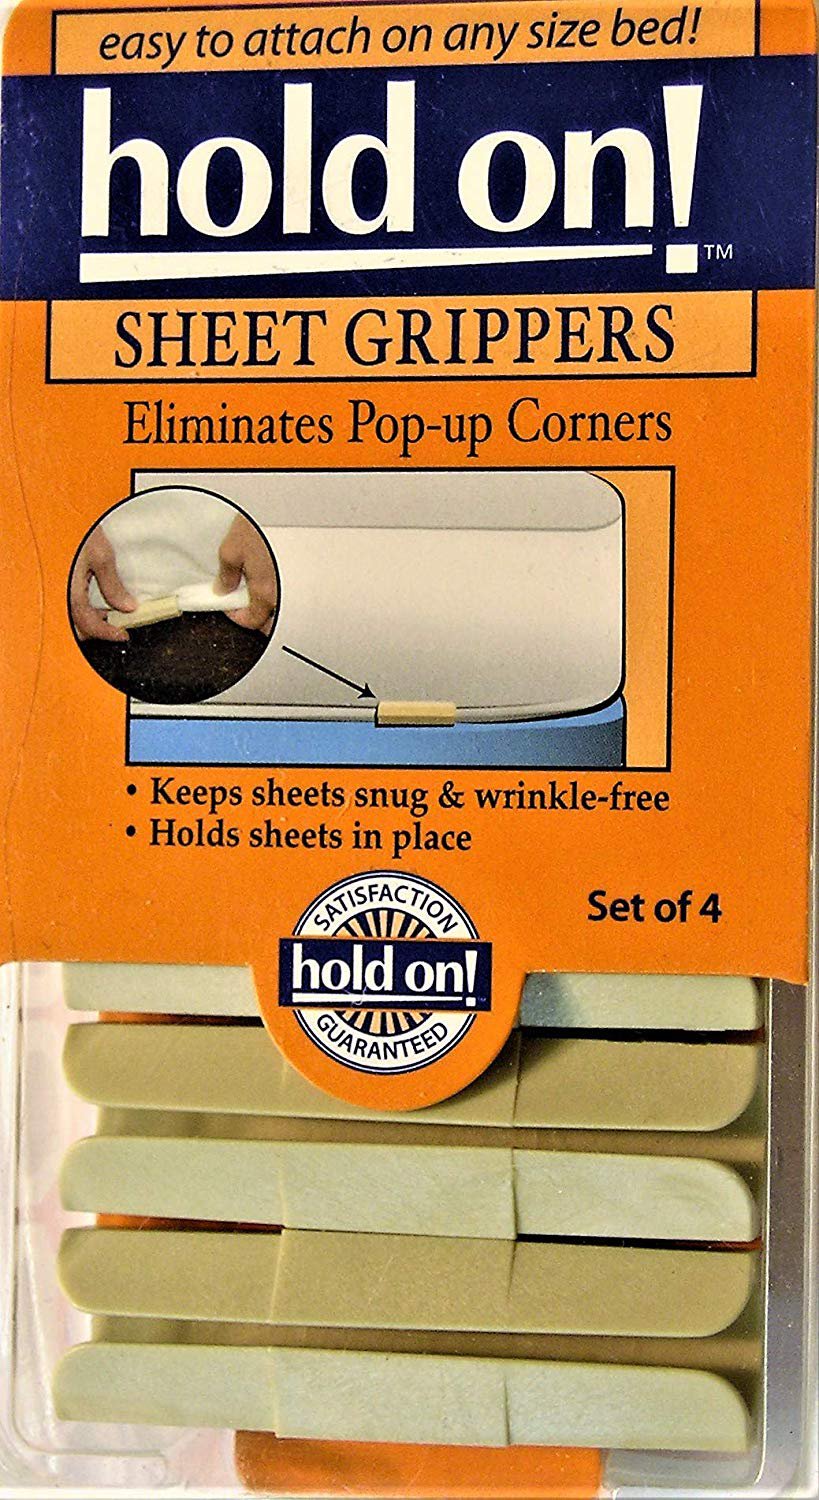 hold on! Set of 4 Sheet Keepers - Keeps Sheets Snug & Wrinkle-free, Holds Sheets in Places!